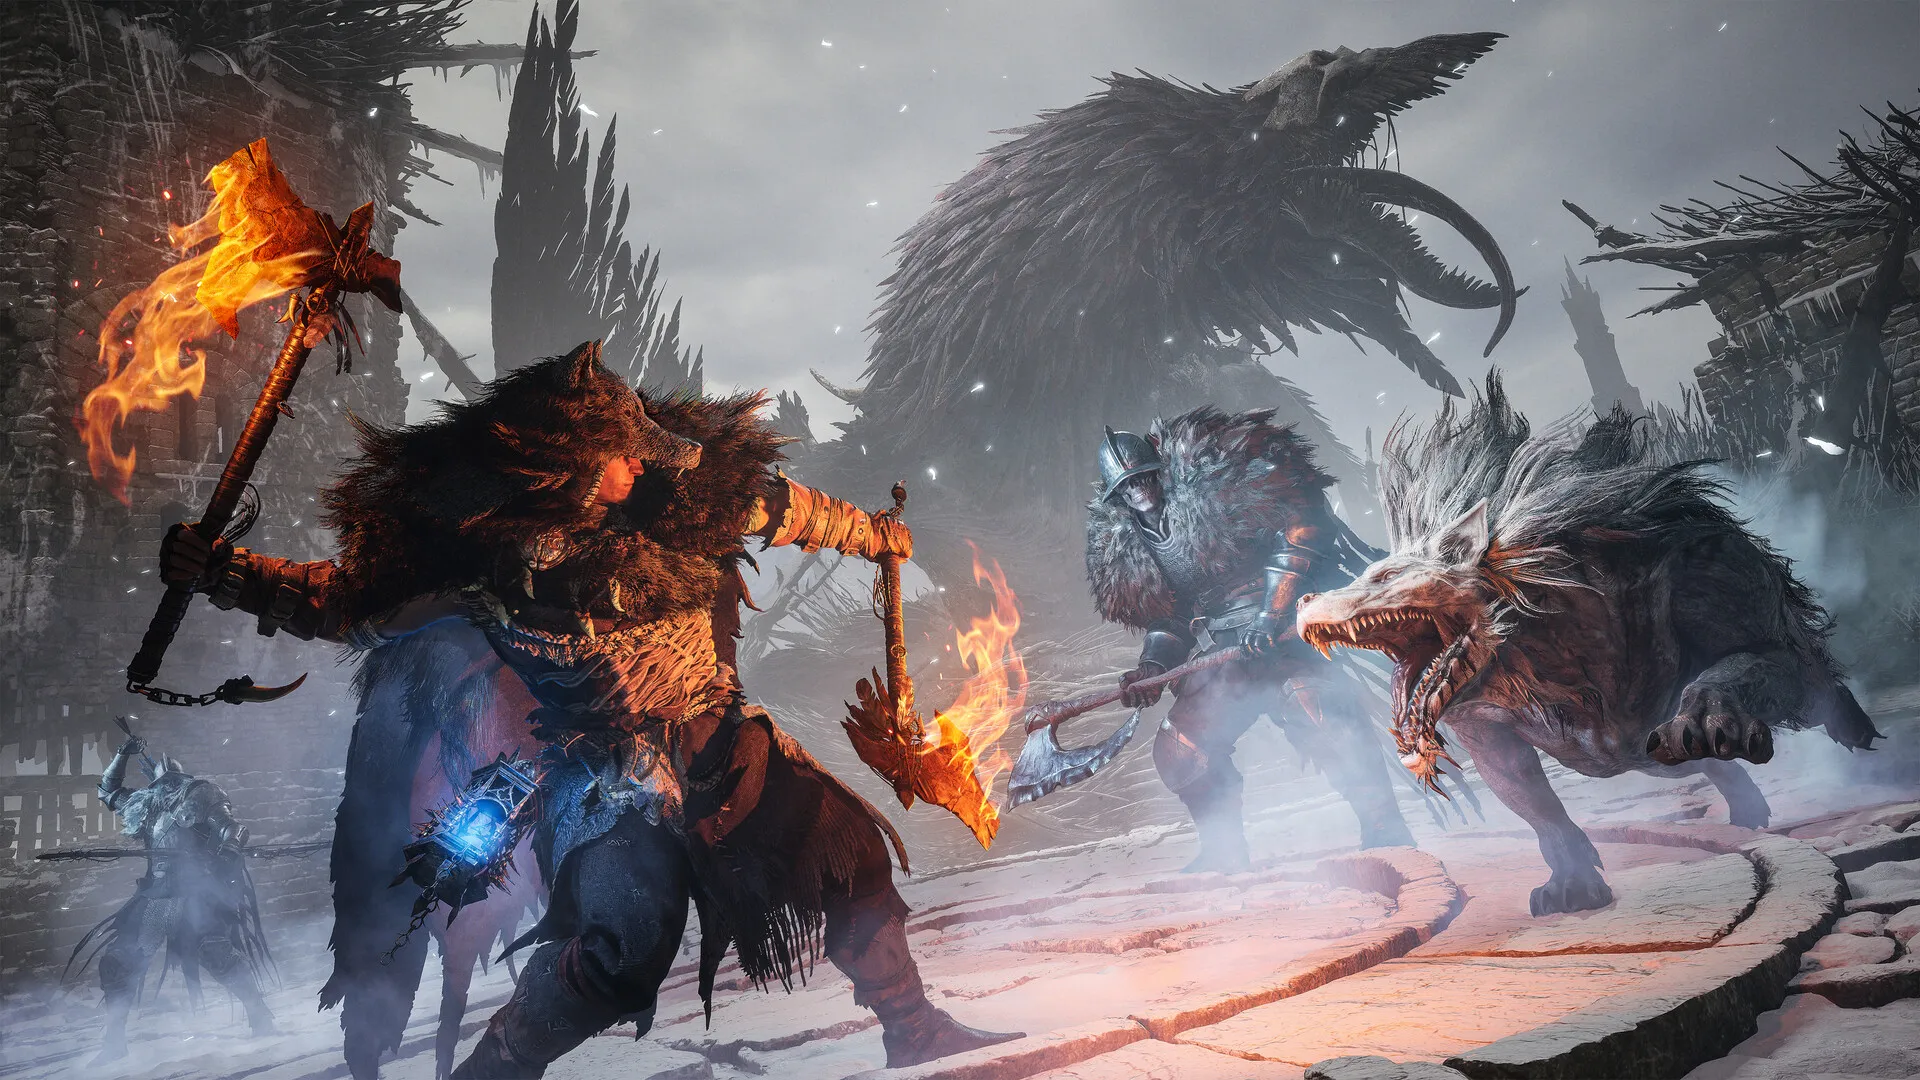 Lords of the Fallen Achievements Guide: The Complete List